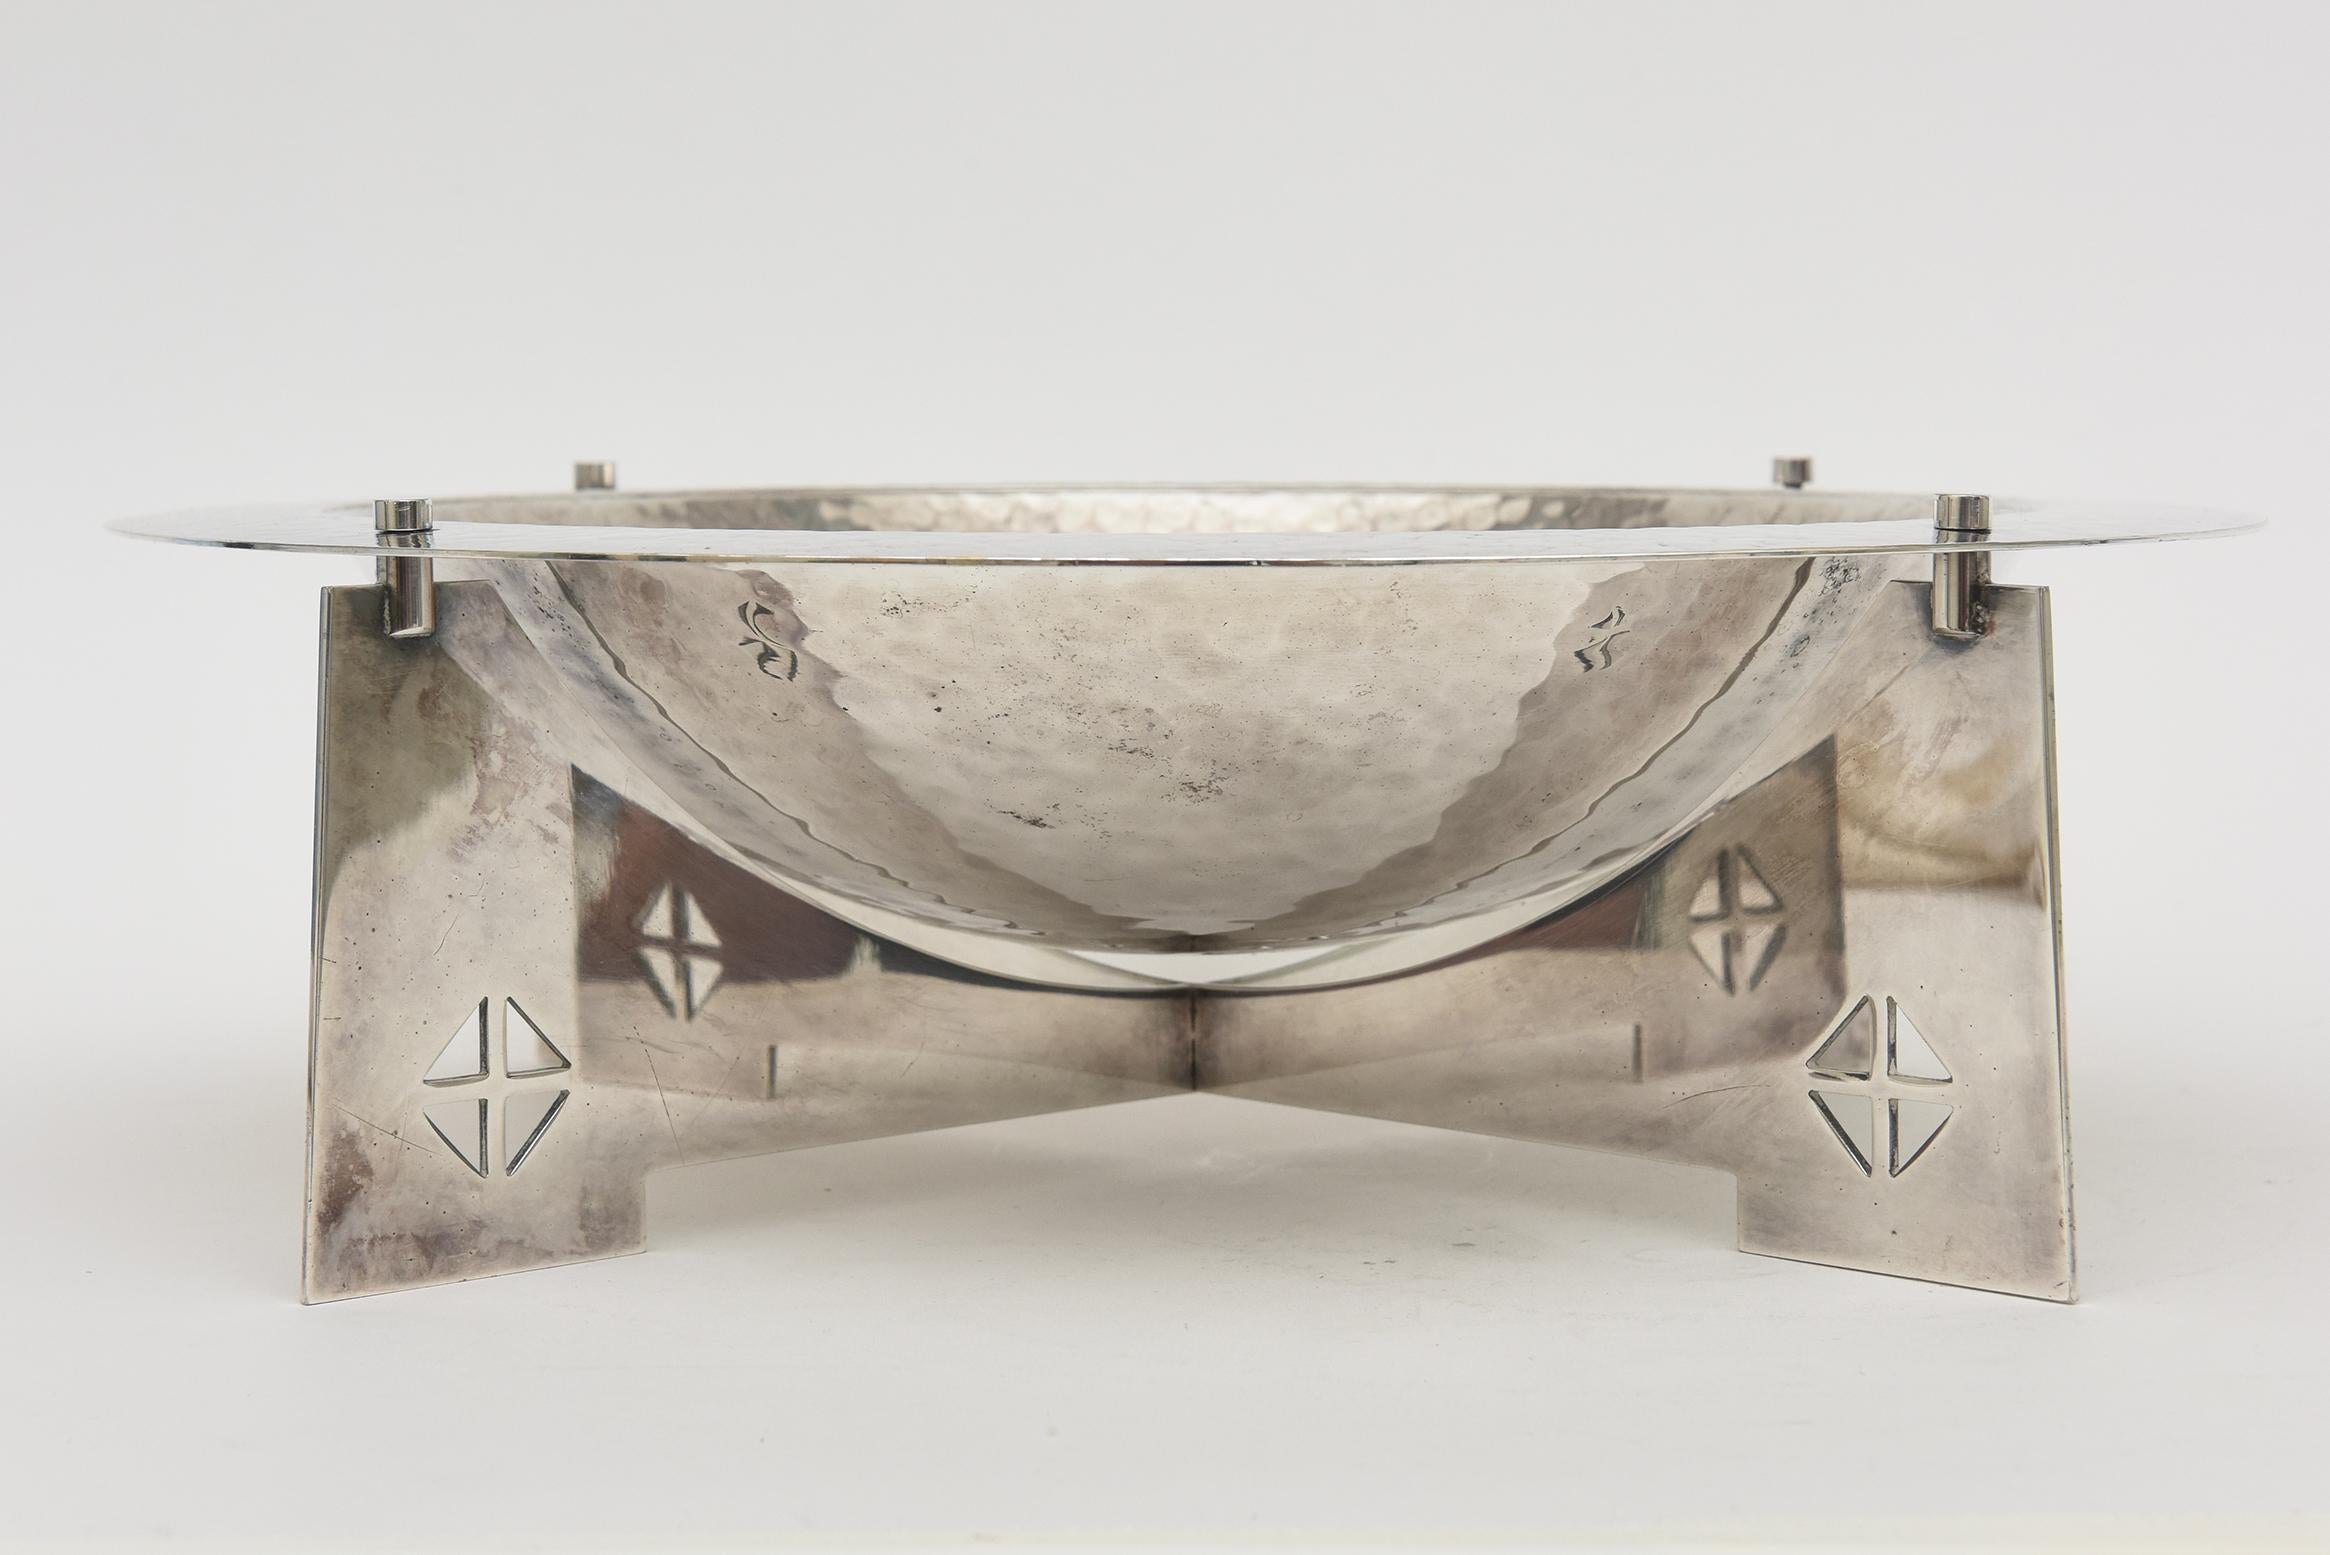 This vintage hand hammered silver-plated brass bowl by the architectural team of Robert Siegel and Charles Gwathmey for Swid Powell is one of the most iconic designs made and also one of the most scarcely found. It is called the Courtney Centerpiece